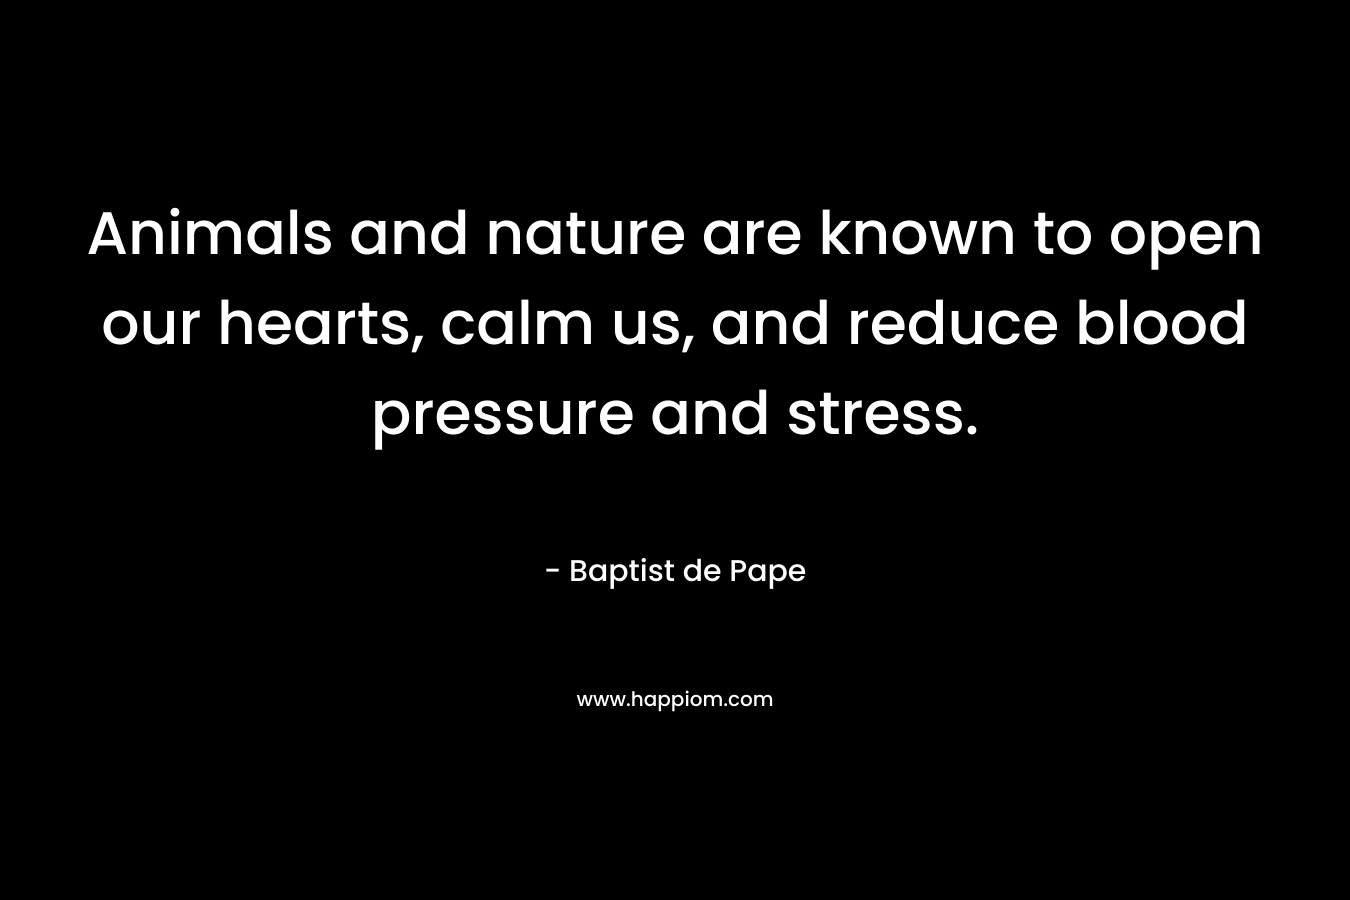 Animals and nature are known to open our hearts, calm us, and reduce blood pressure and stress. – Baptist de Pape